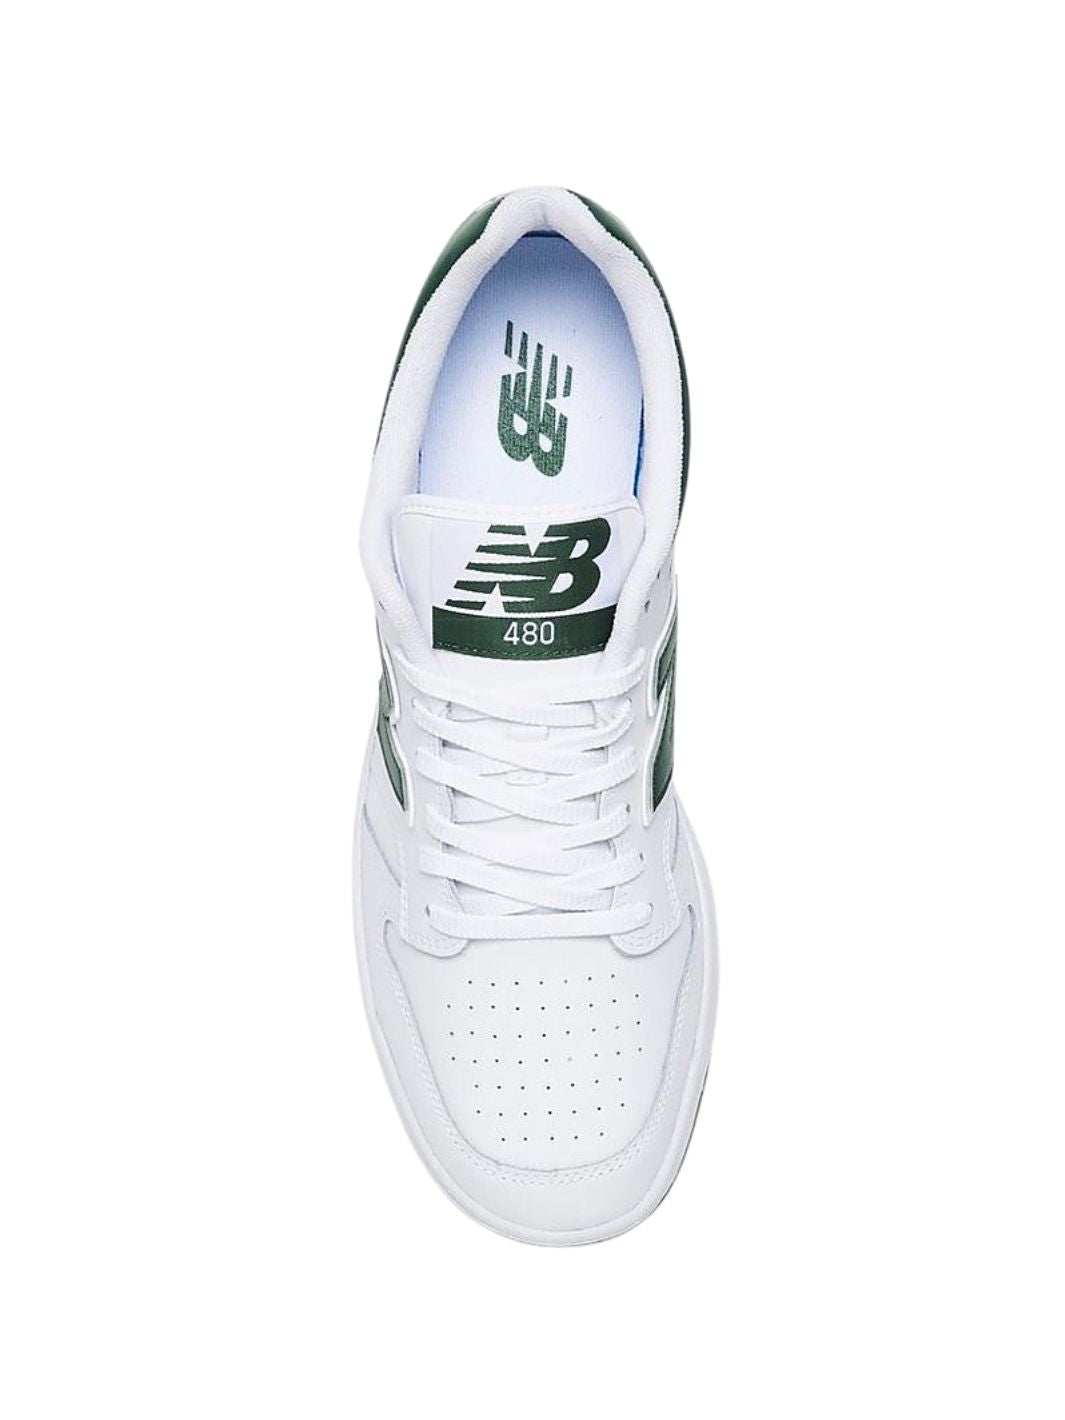 New Balance Shoes Sneakers | BB480LNG White/Nightwatch Green